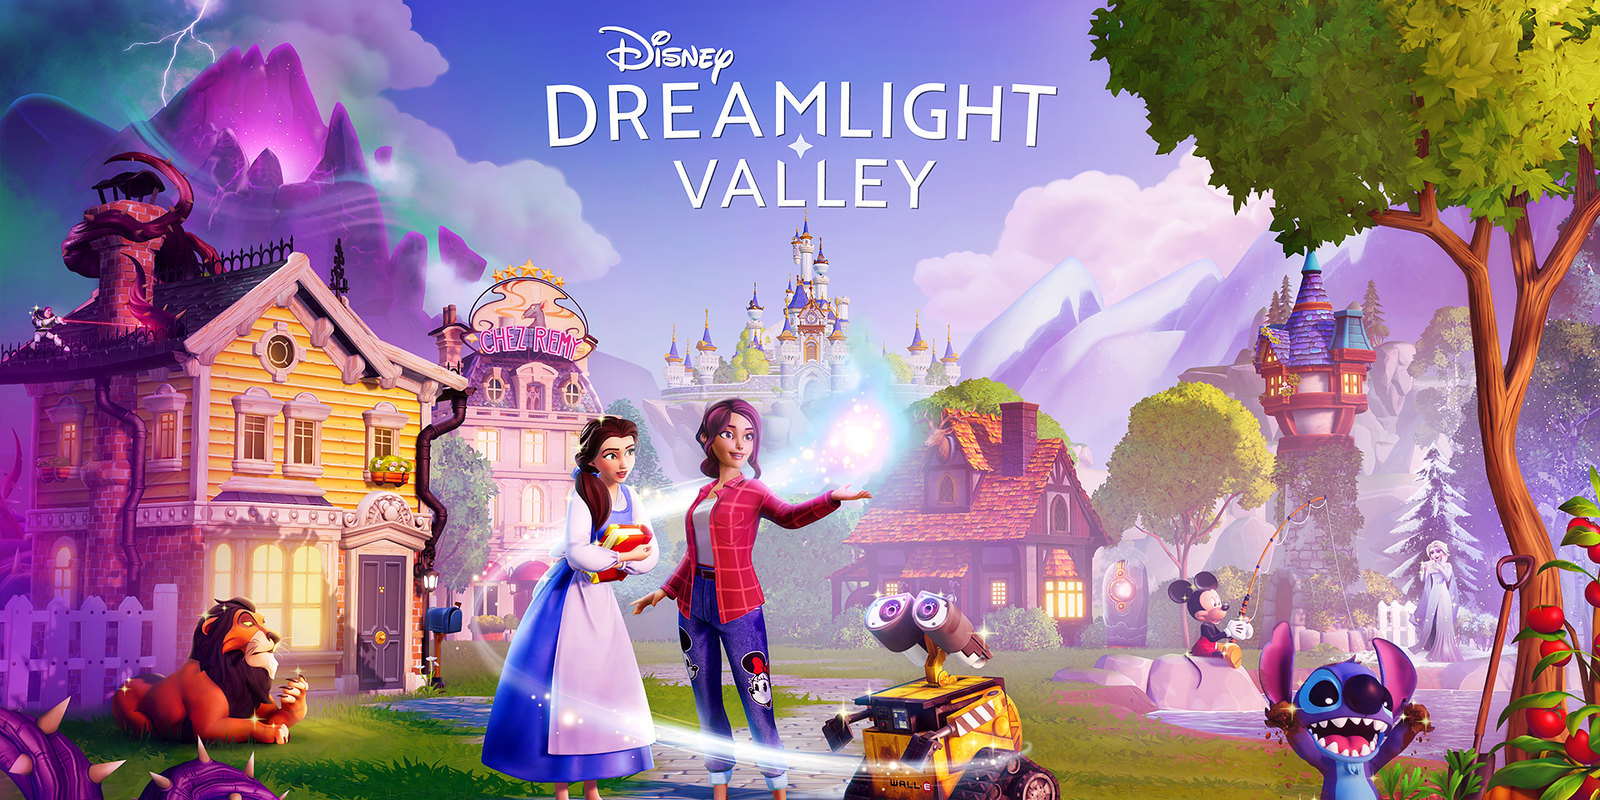 Disney and Pixar unveil new Disney Dreamlight Valley game - 9to5Toys